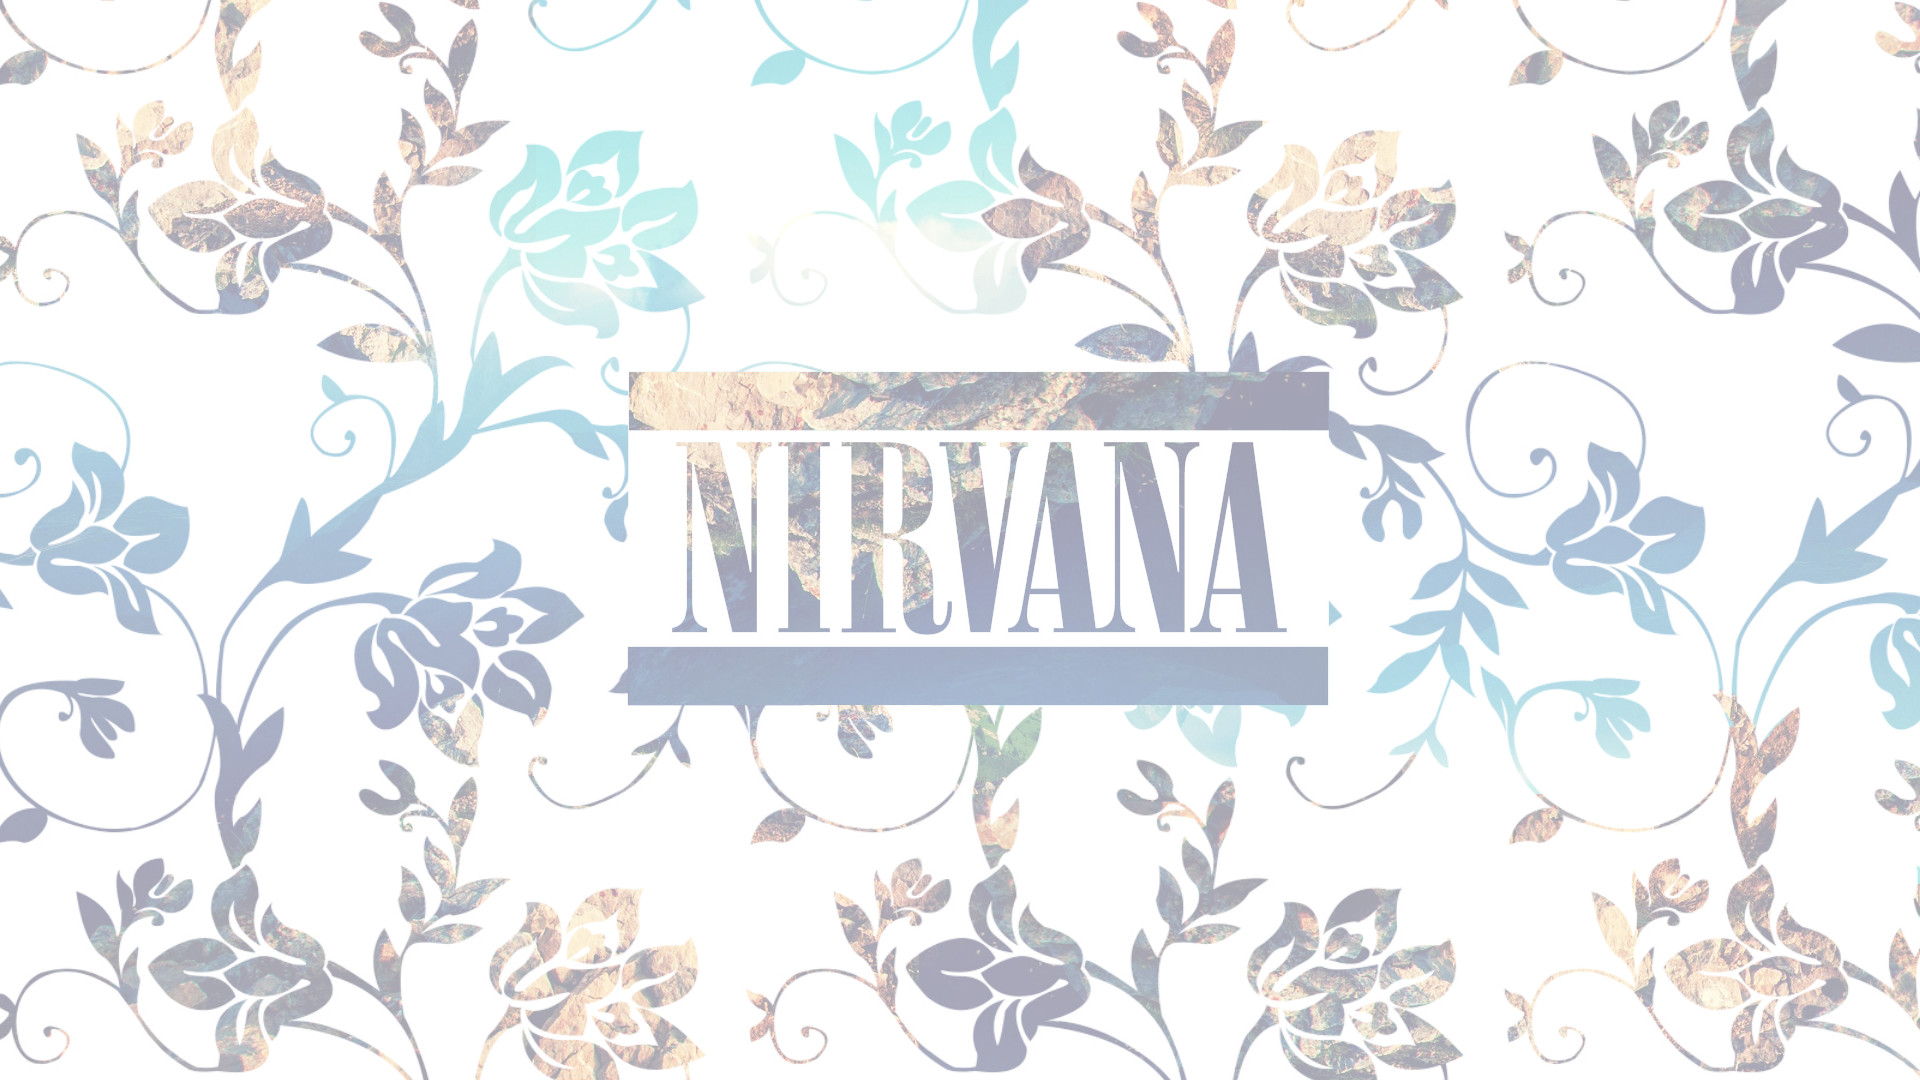 1920x1080 ... Some hipsters shit 1 - Nirvana HD Wallpaper by MuuseDesign